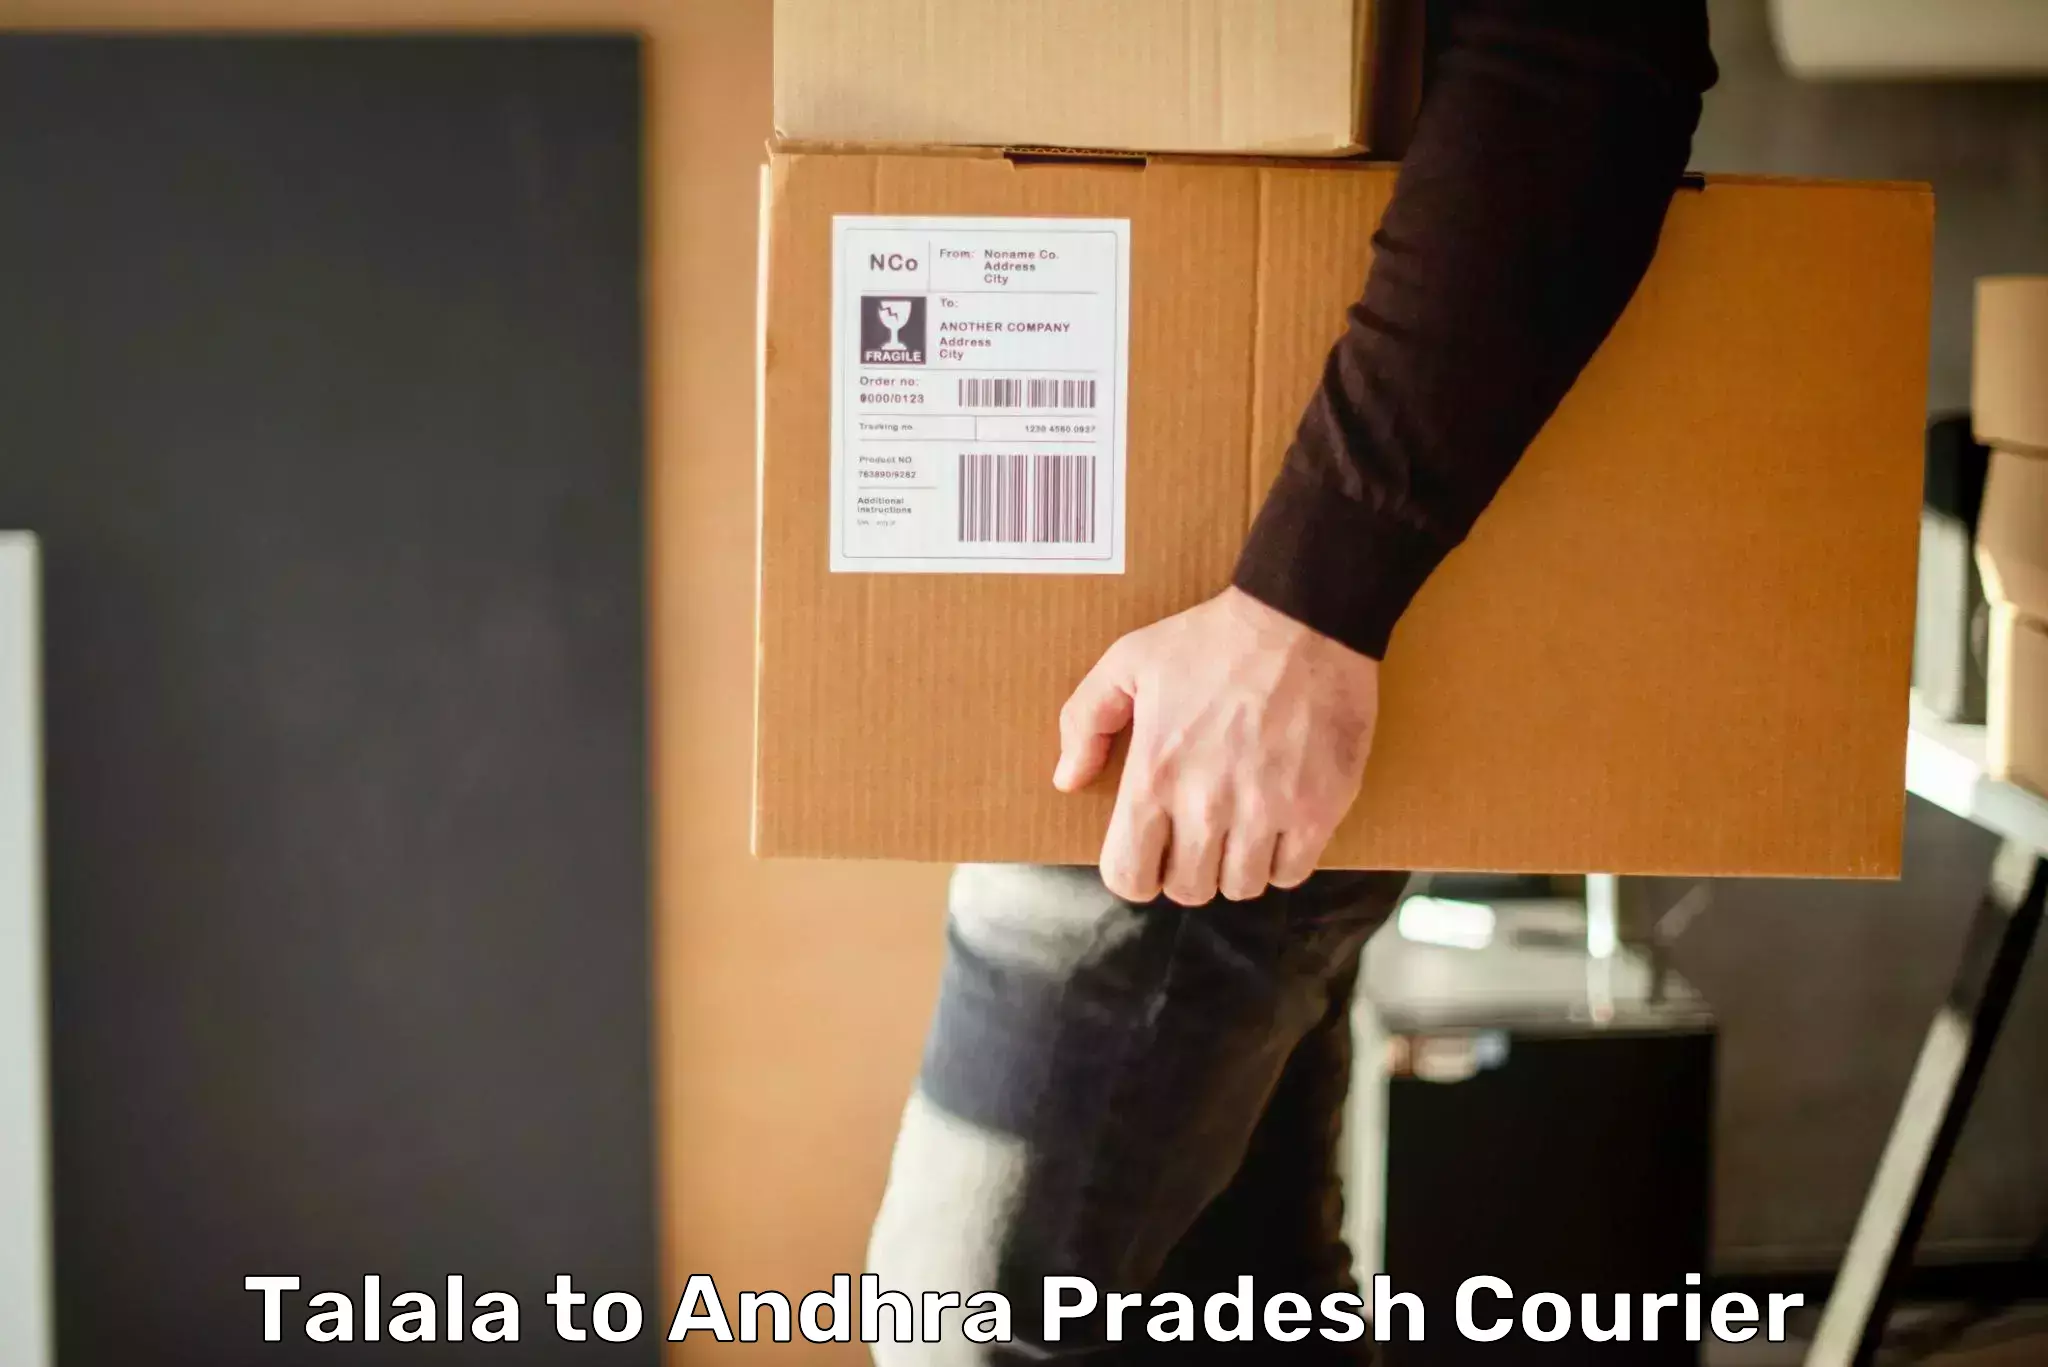 State-of-the-art courier technology Talala to Andhra Pradesh